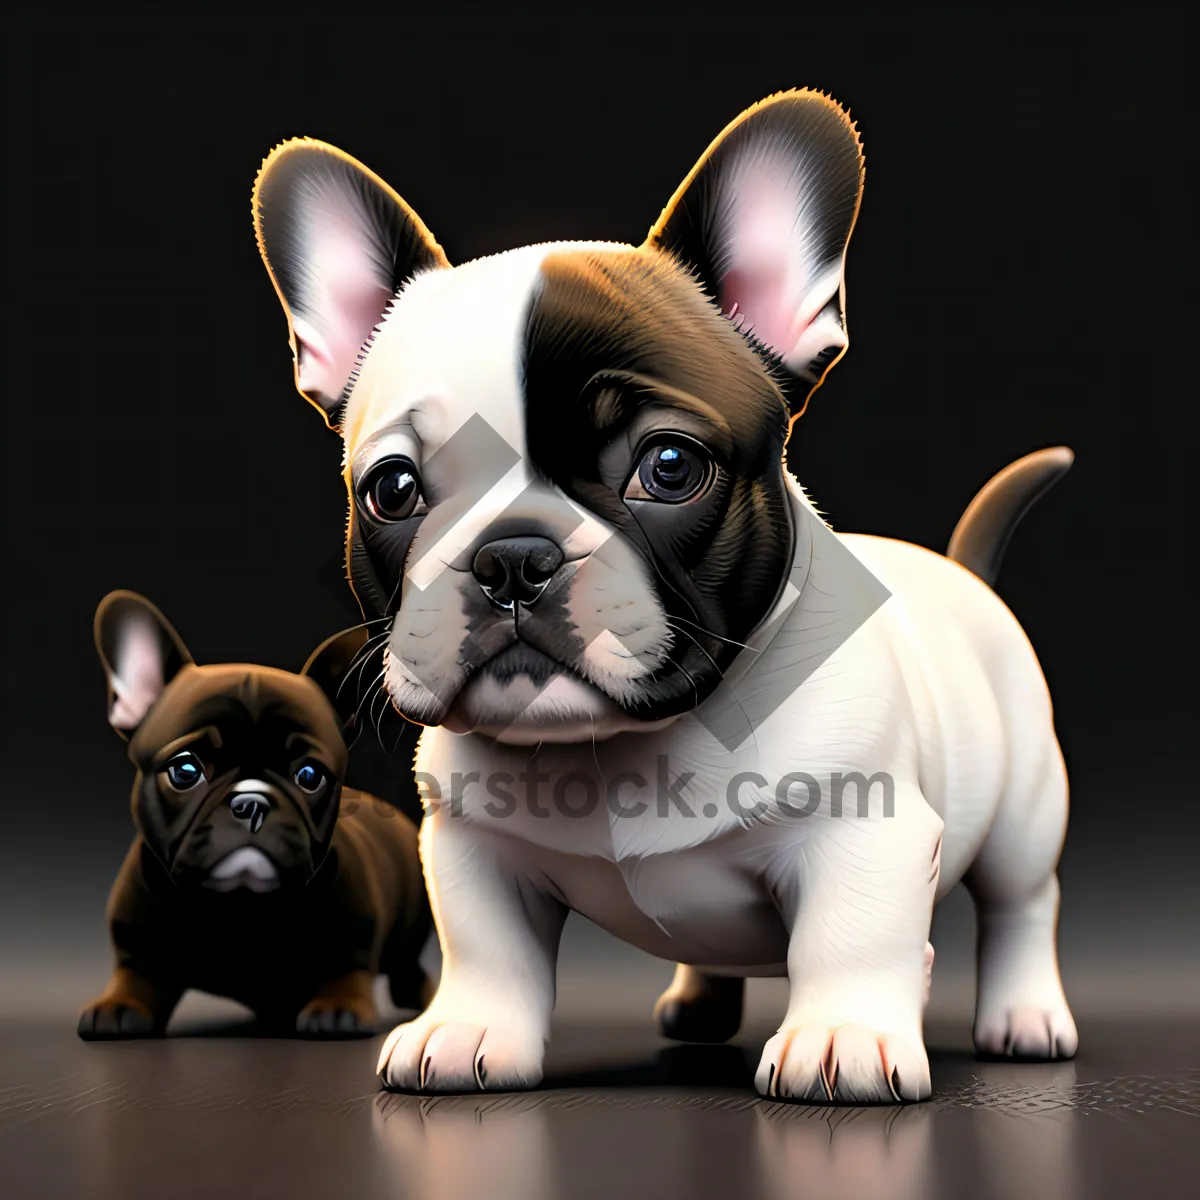 Picture of Absolutely adorable bulldog puppy captured in a charming studio portrait